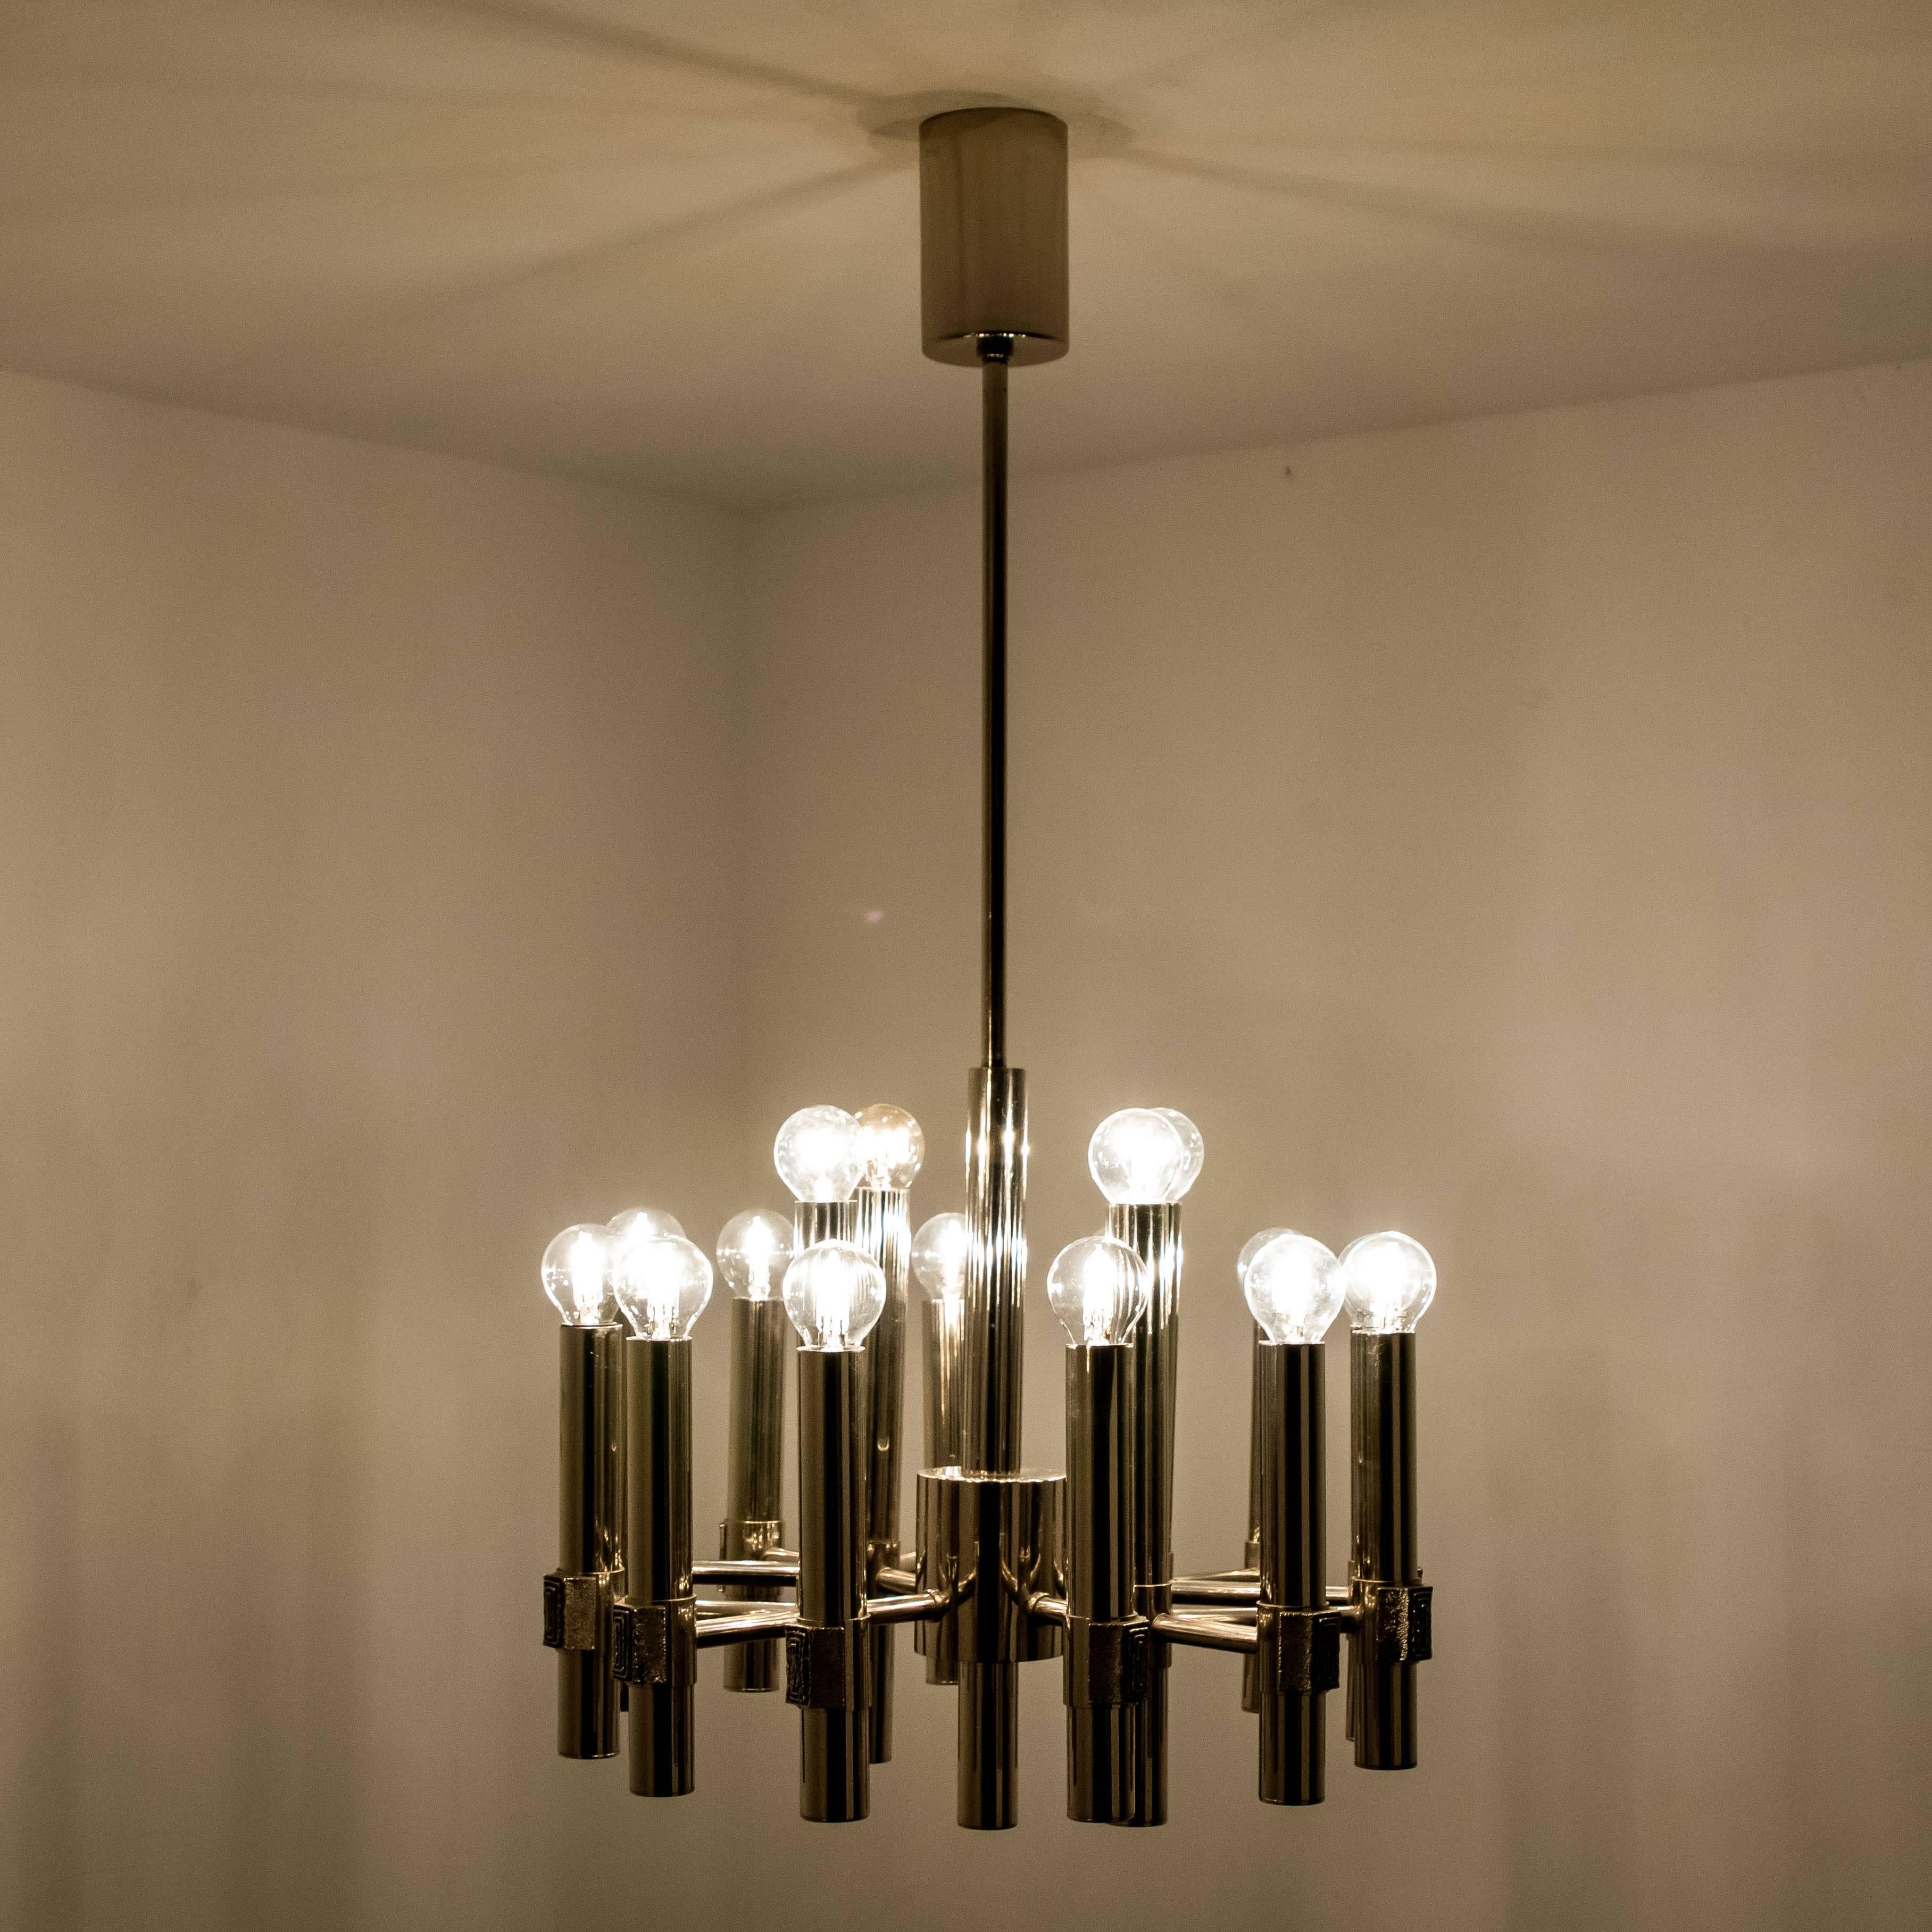 Mid-20th Century Chandelier or Sputnik by Angelo Brotto for Esperia Italia For Sale